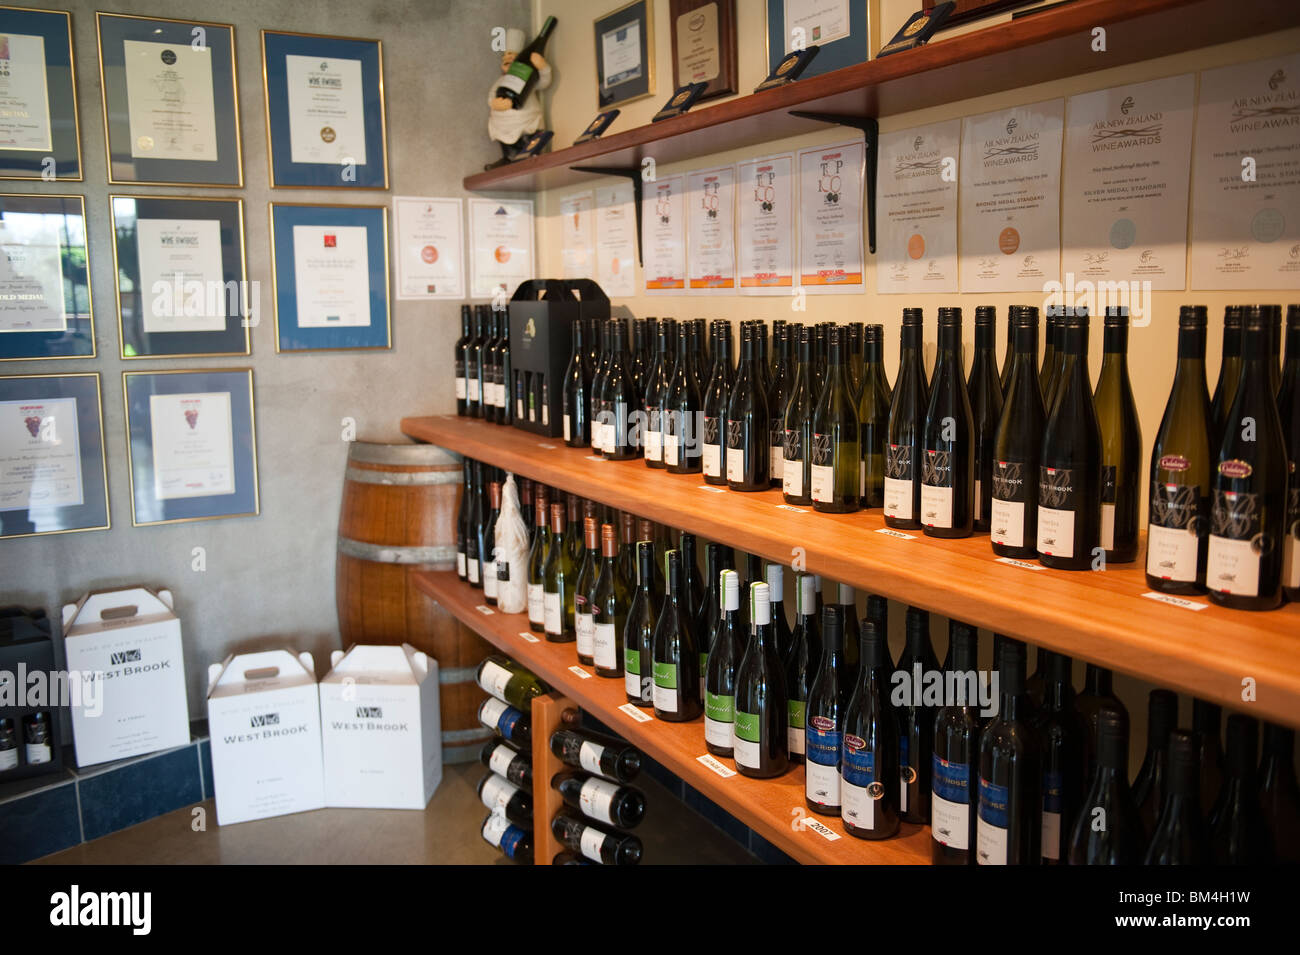 Selection of wines at the Cellar door at West Brook Winery, Kumeu Region, West Auckland, New Zealand Stock Photo